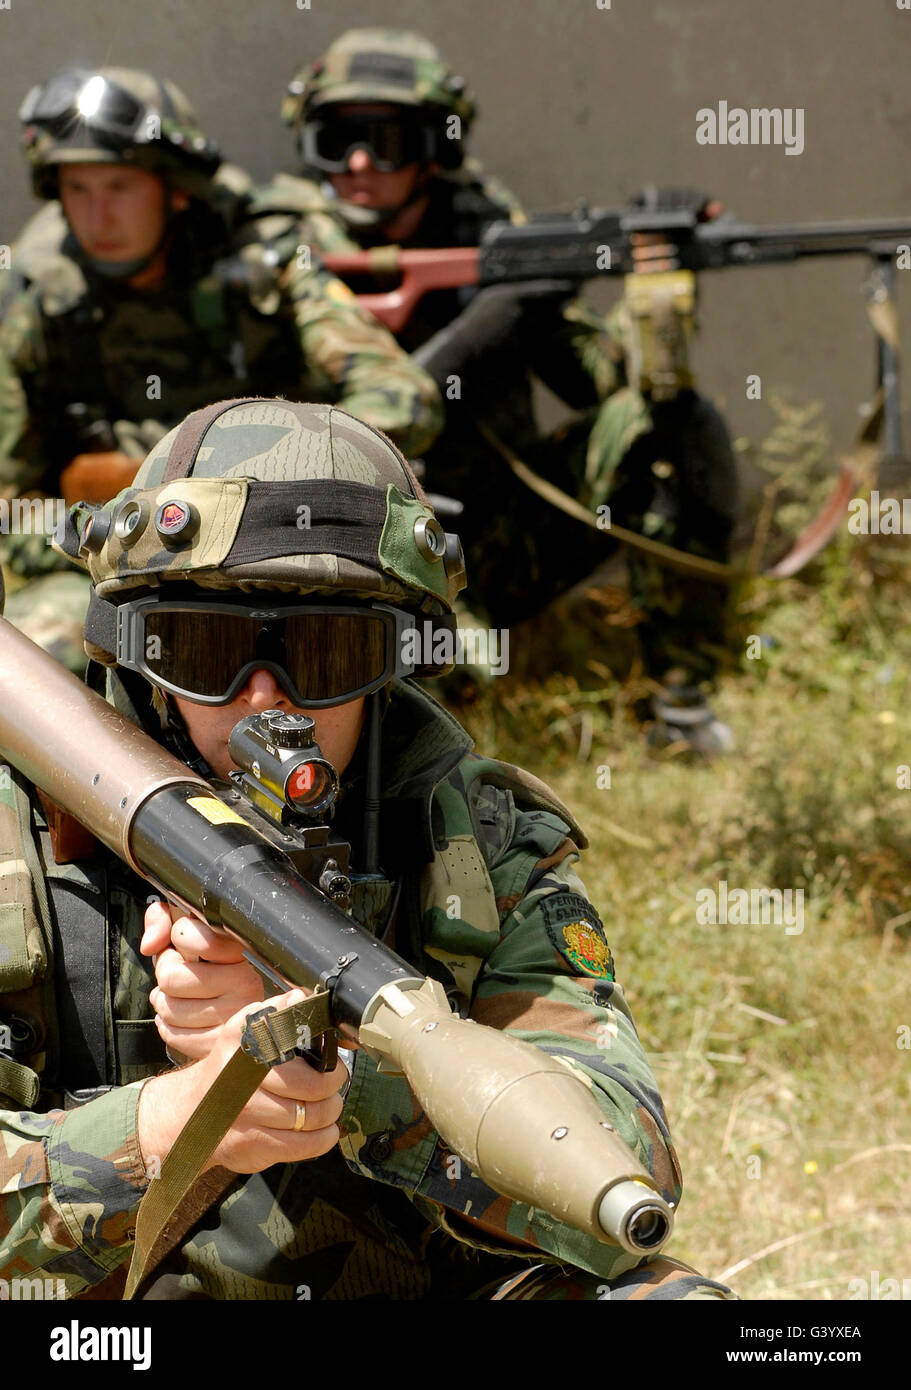 A Bulgarian army soldier, scans the battlefield in front of him with his rocket-propelled grenade launcher. Stock Photo